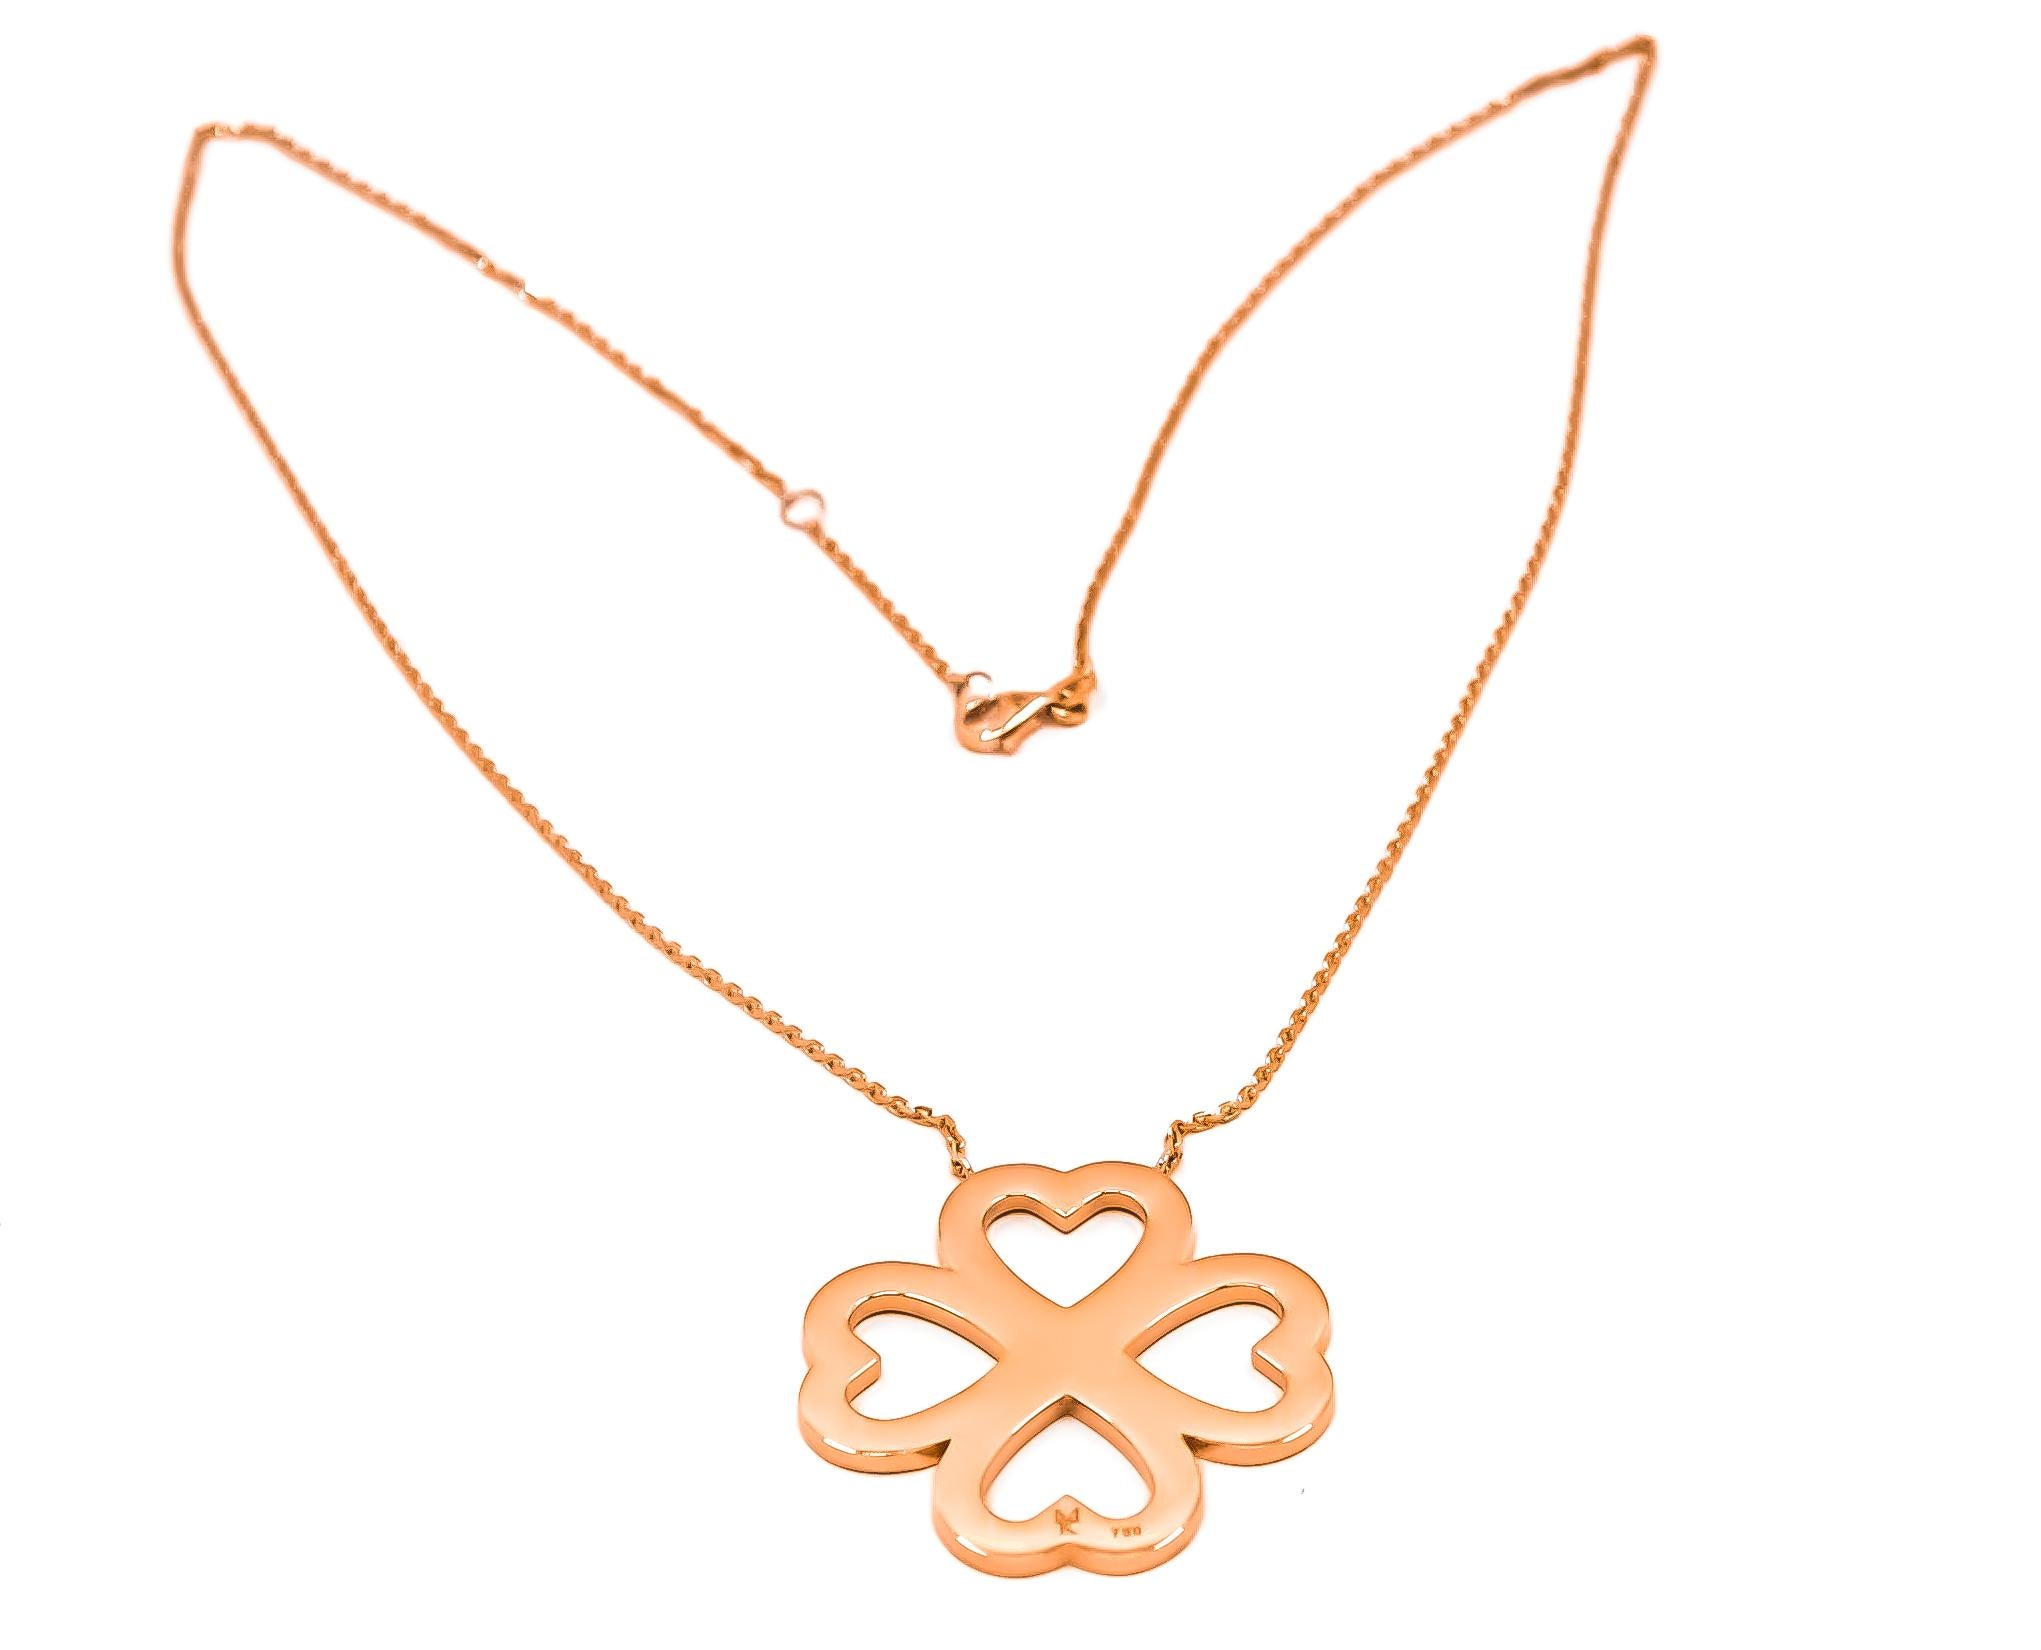 Women's Heart Blossom Pendant Necklace in 18kt Rose Gold For Sale